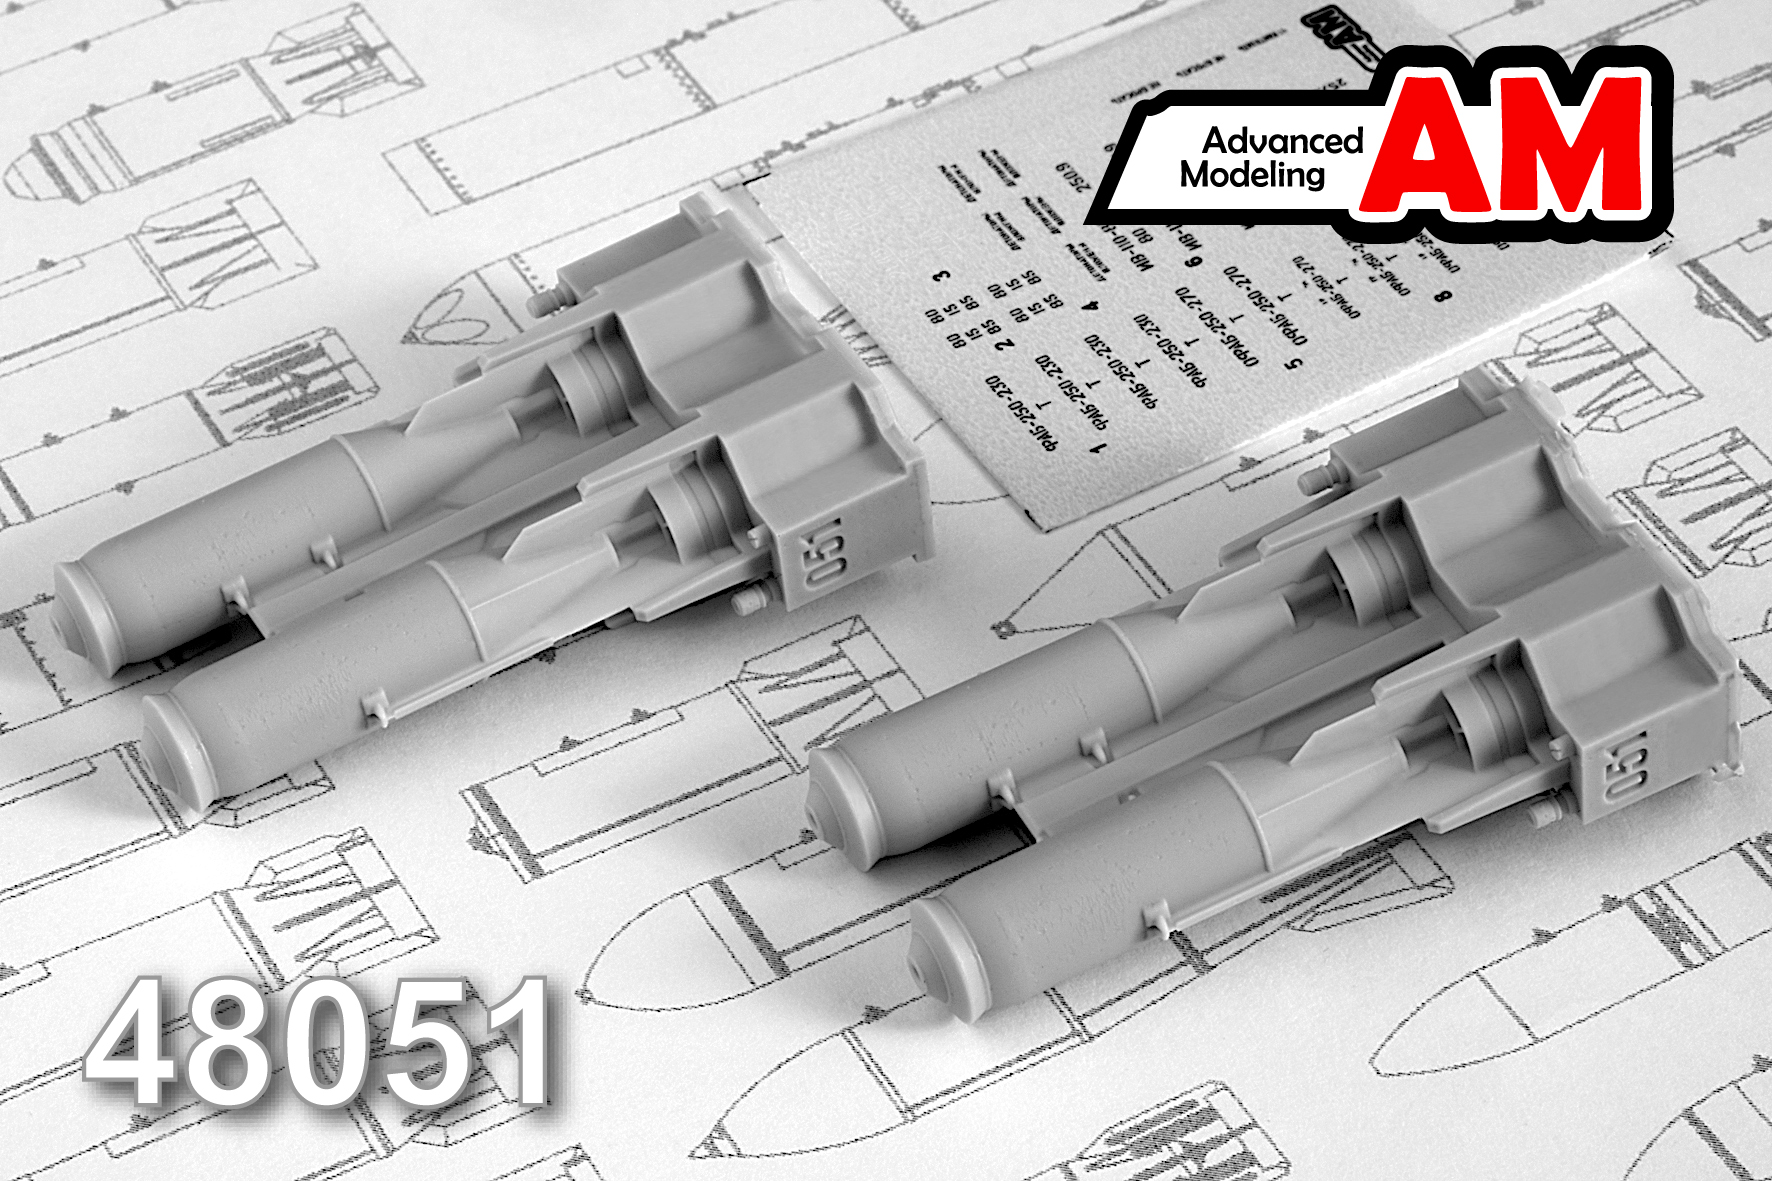 Additions (3D resin printing) 1/48 OFAB-250-230, 250 kg caliber fragmentation-fuzed aerial bomb (Advanced Modeling) 